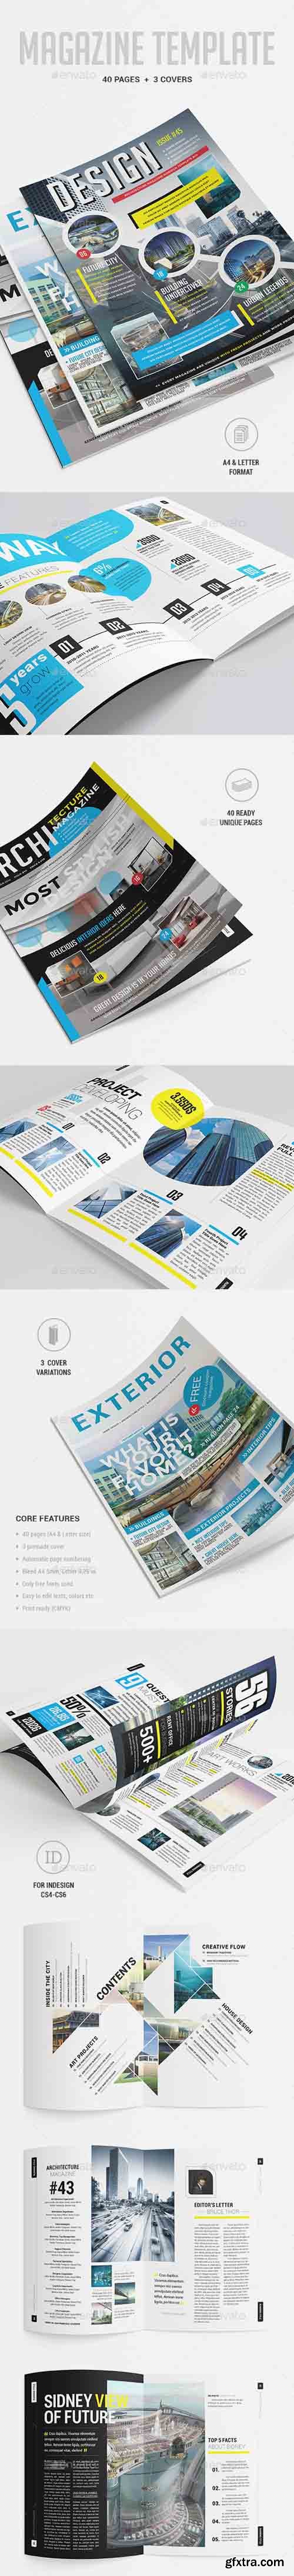 GR - Magazine Template (A4&Letter) 9717459